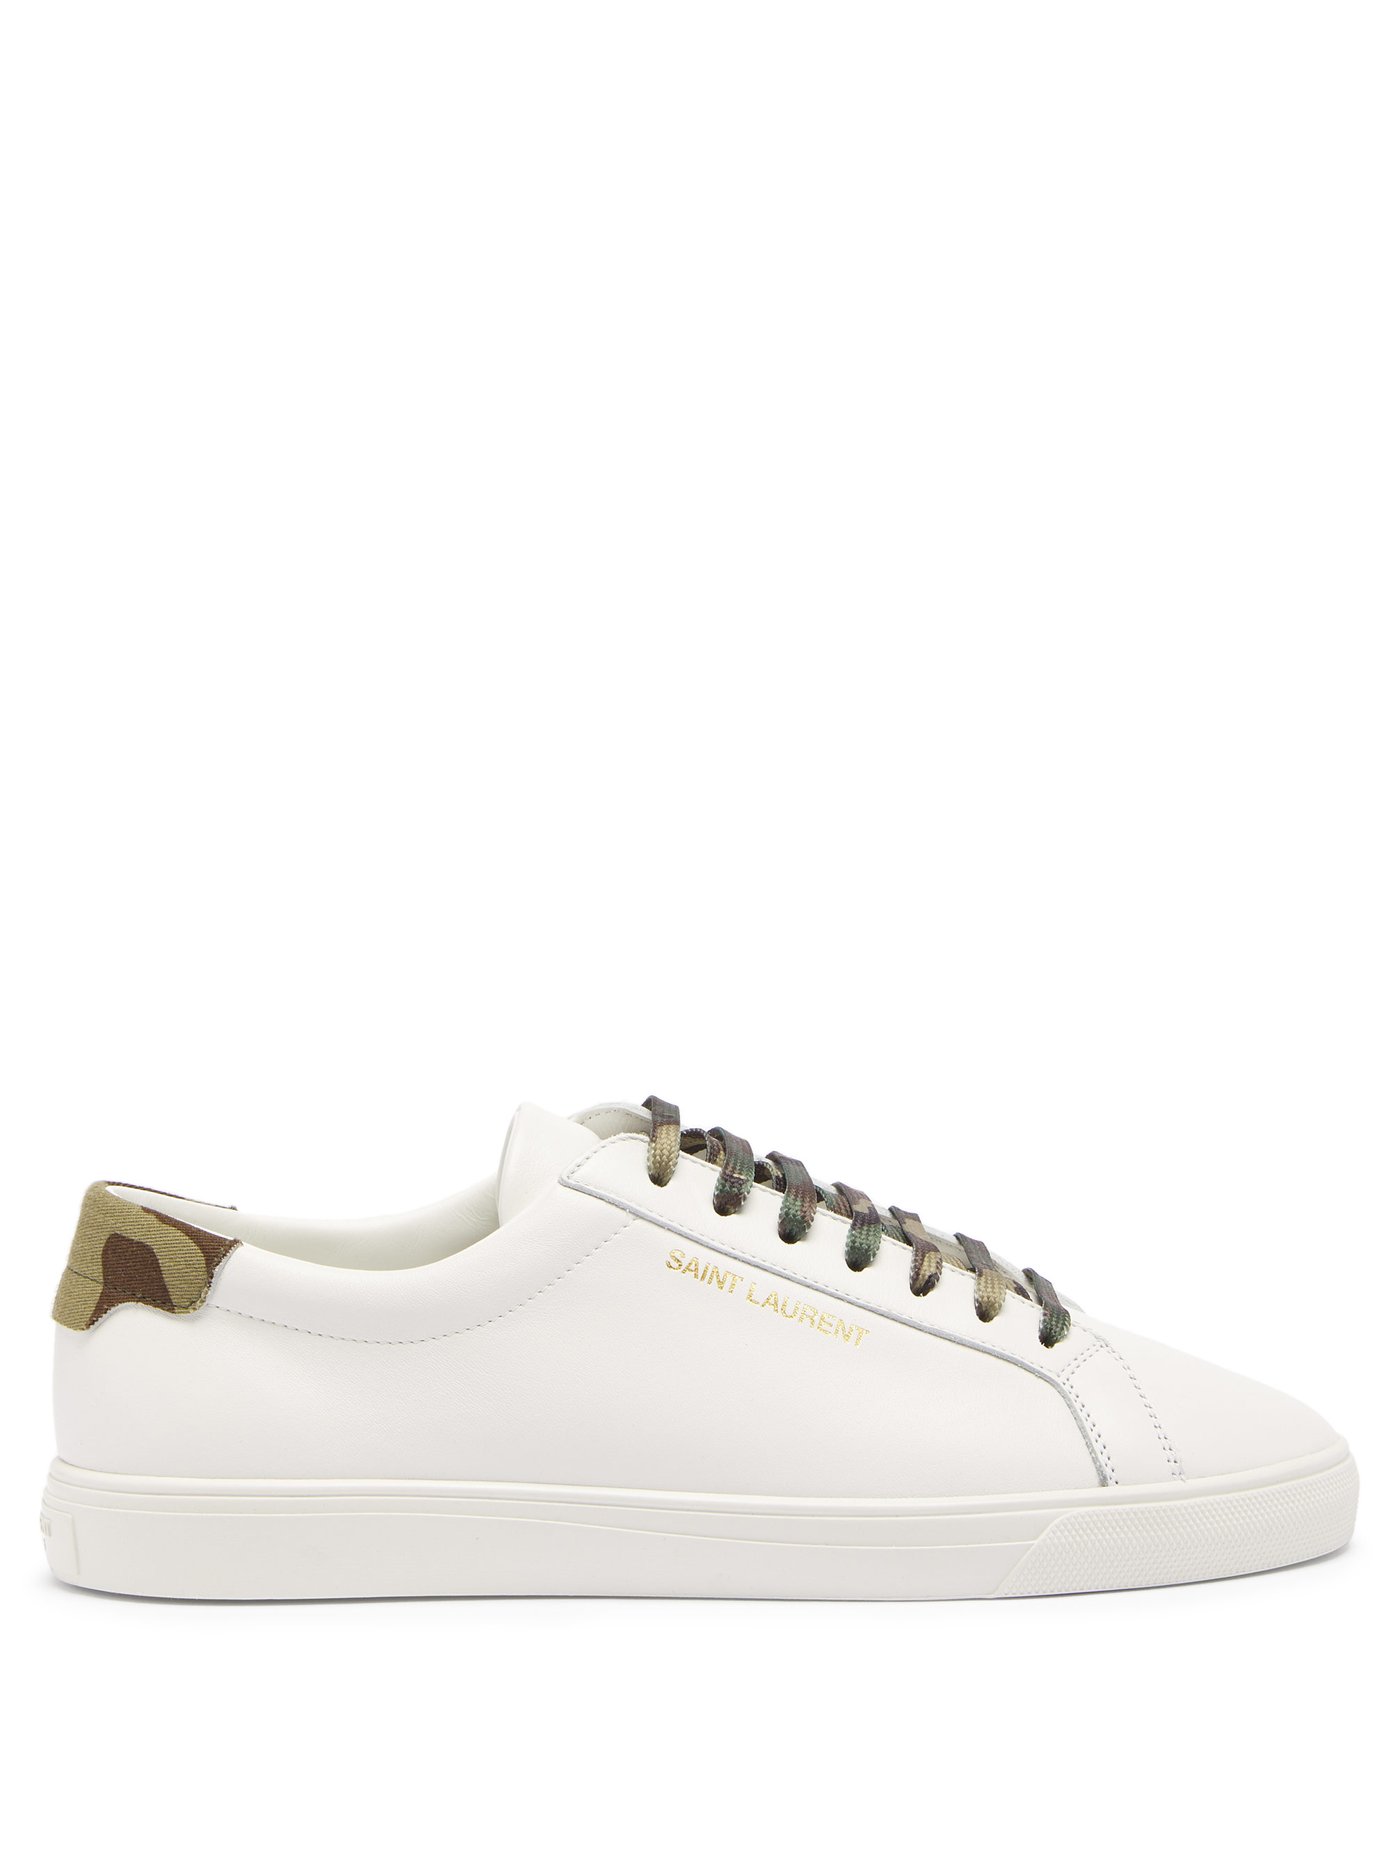 Andy leather trainers | Saint Laurent 